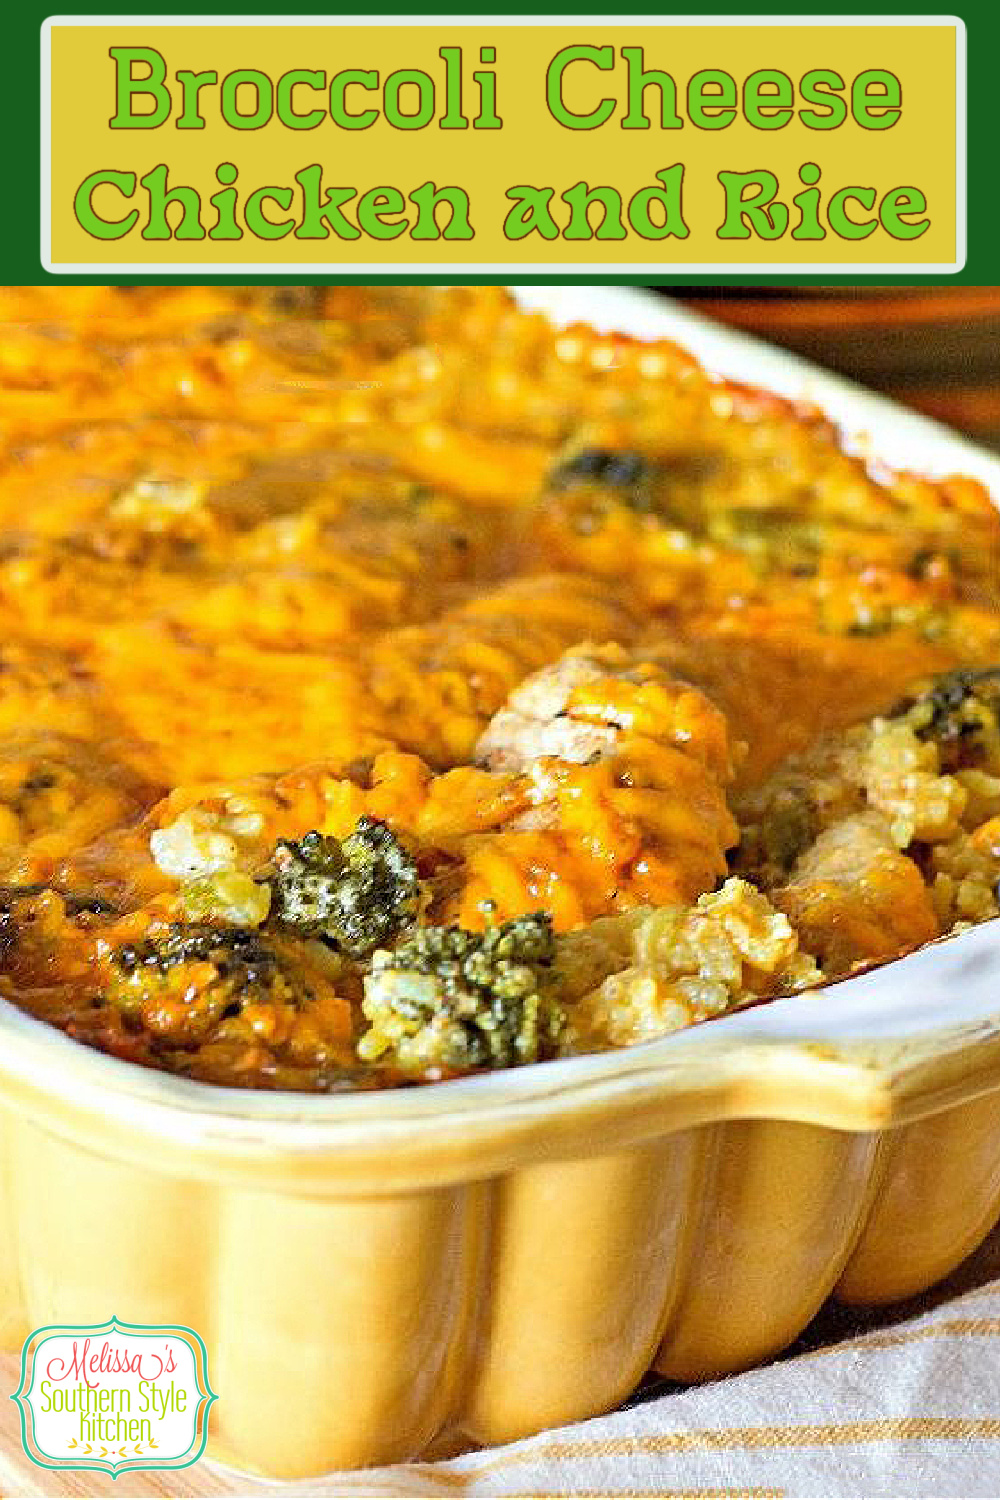 This tummy filling Broccoli Cheese Chicken and Rice casserole is packed with seasoned chicken, broccoli, rice and plenty of gooey cheese #broccolicheese #broccolicheesechicken #chickencasseroles #chickenandrice #ricecasserole #casserolerecipes #dinner #dinnerideas #southernfood #southernrecipes #cheddarbroccoliricecasserole